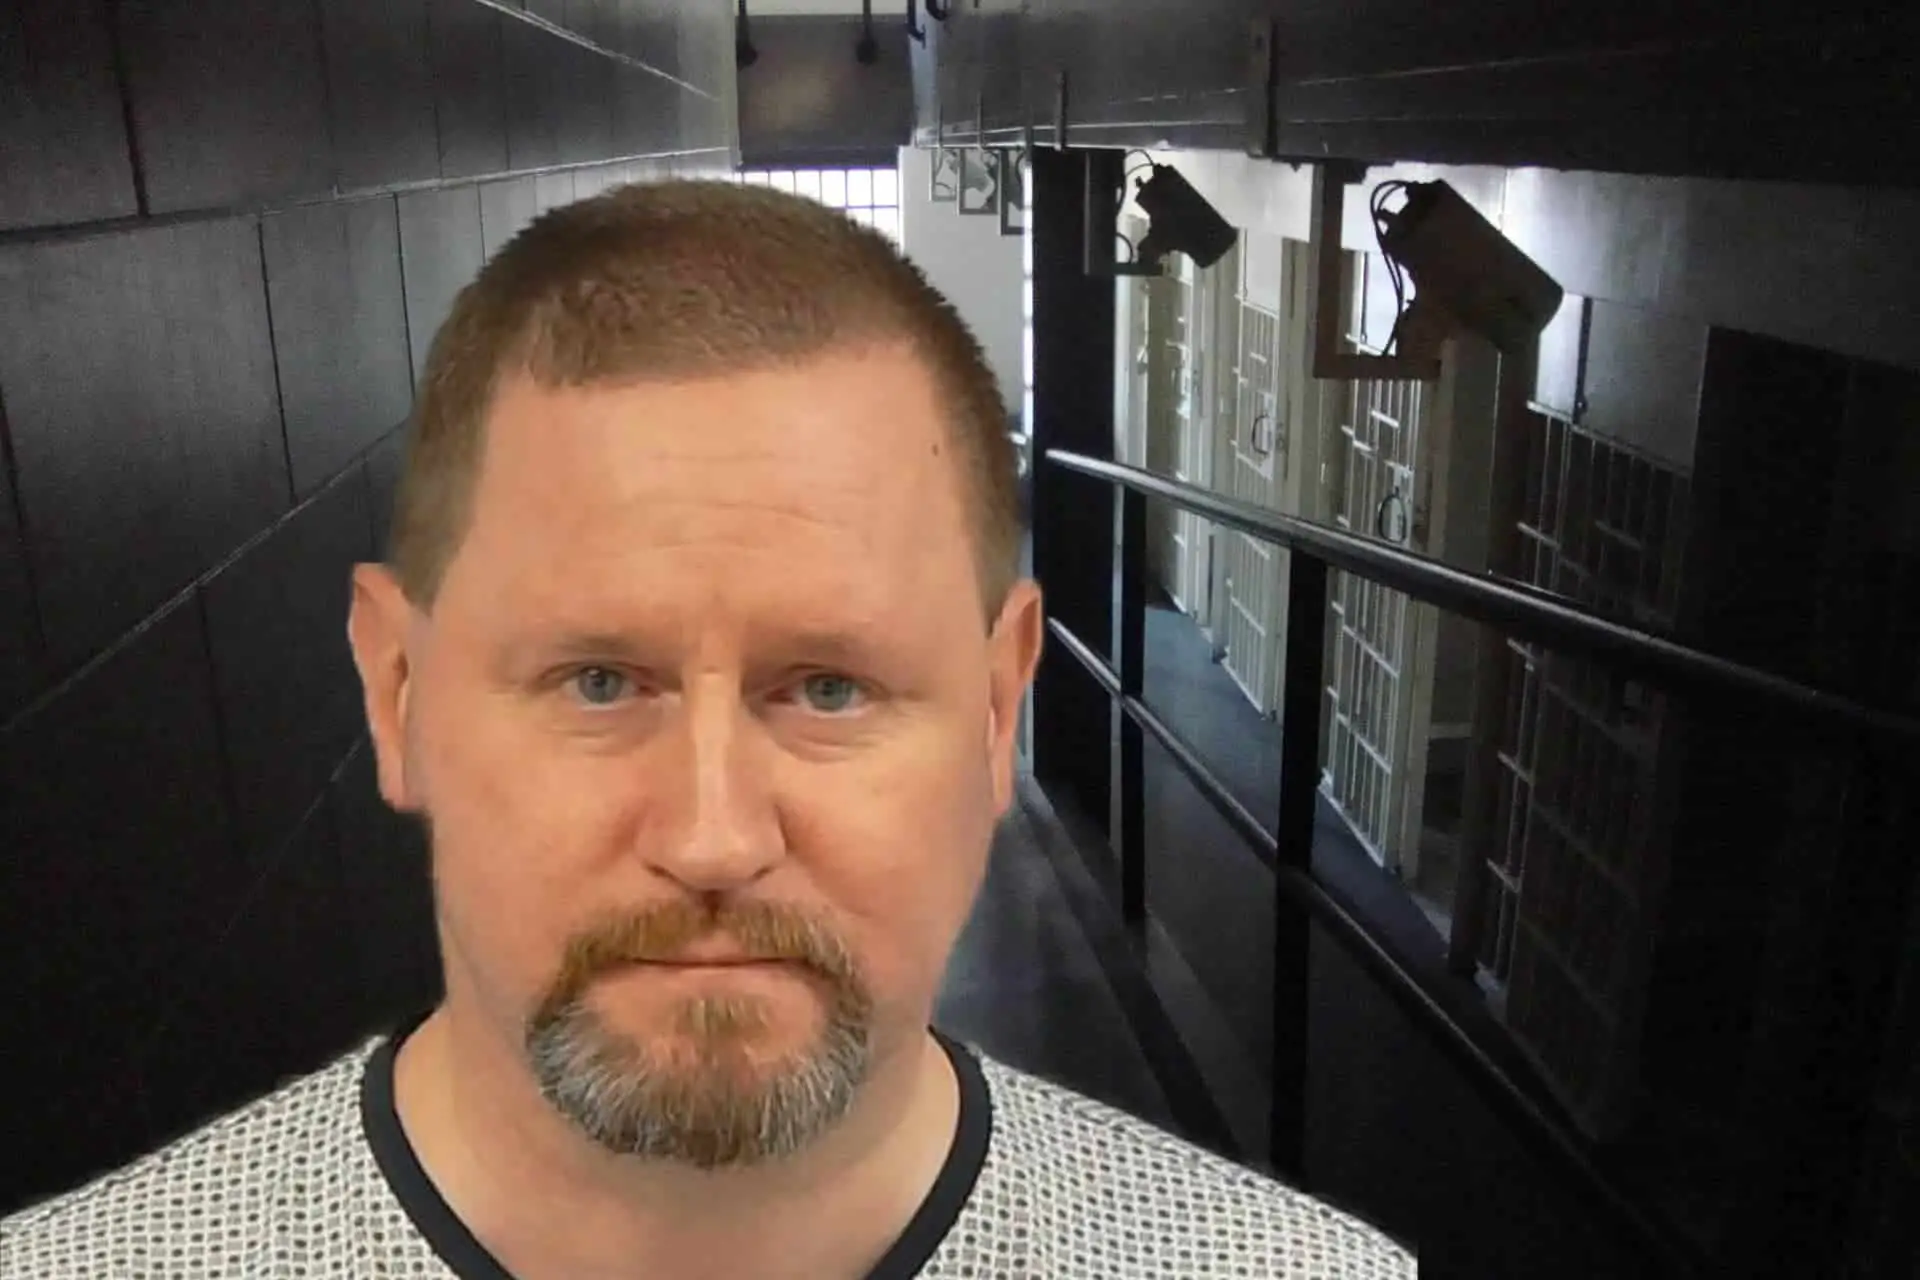 Jail corridor in background and mug shot of Daryll Pitcher in foreground